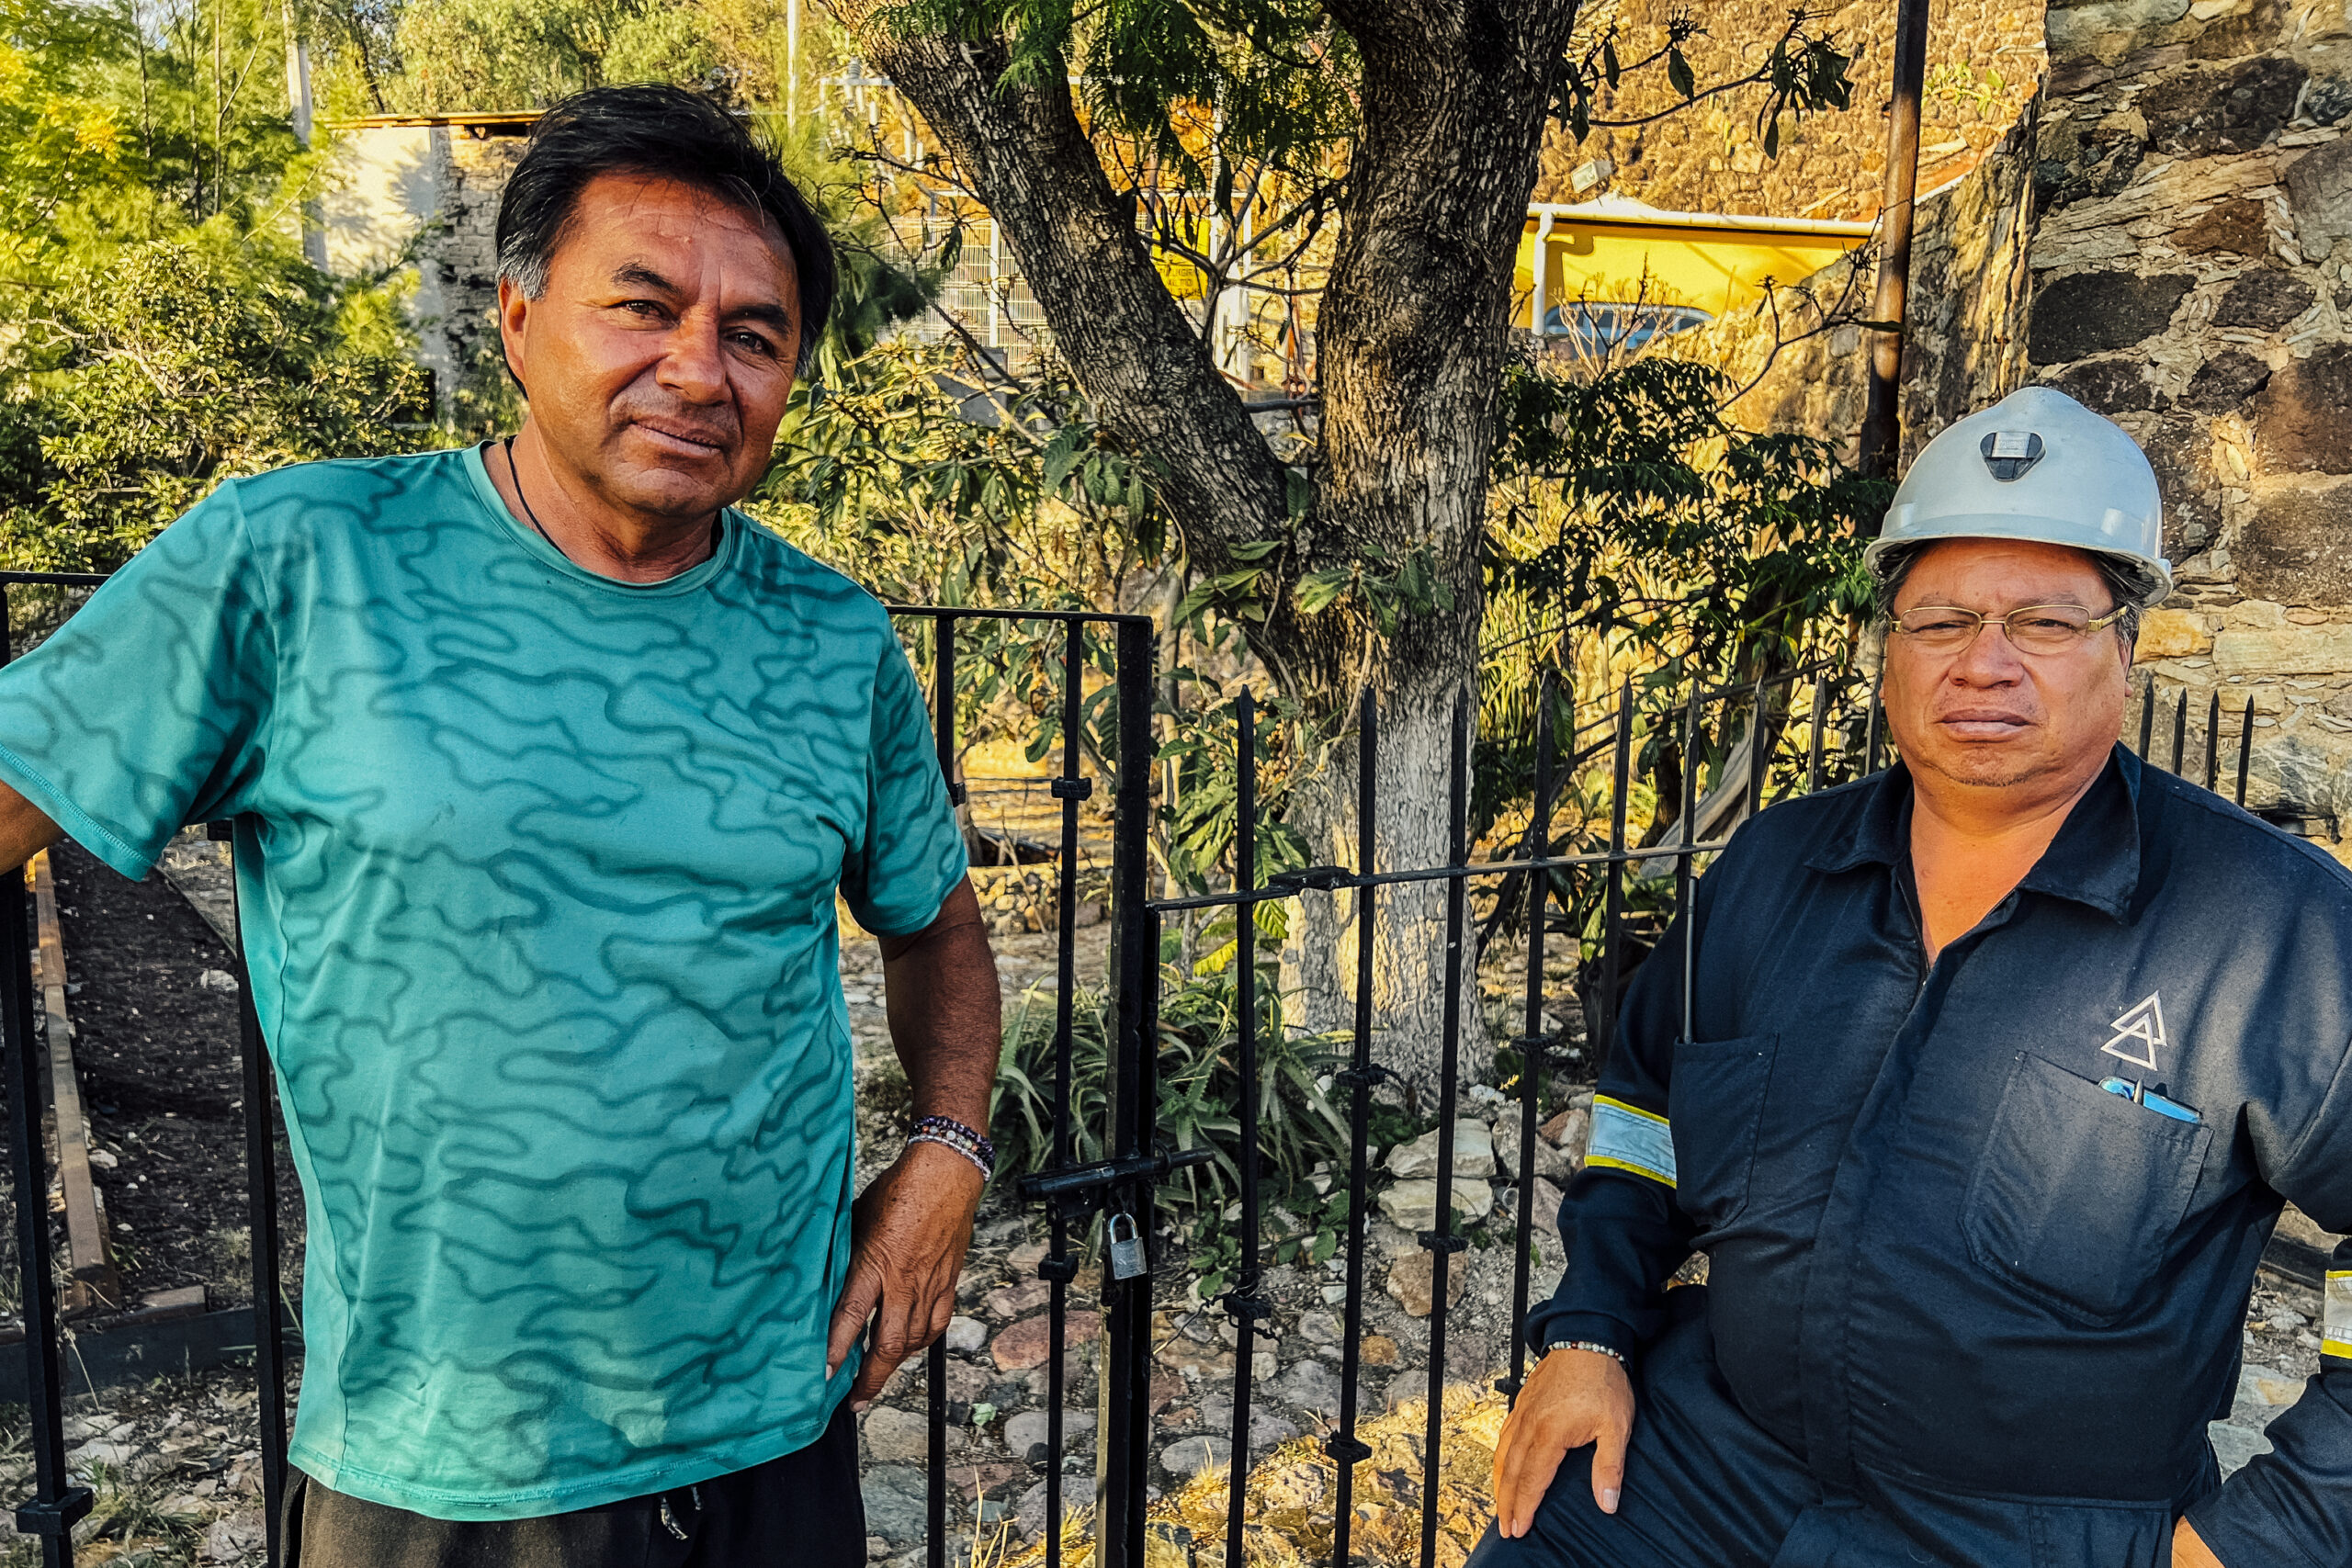 Felipe Rivera (l) and Miguel Villegas (r), were interviewed in Guanajuato, México by Bruce Hobson, a resident of Guanajuato, for their first-hand experience of mining life.